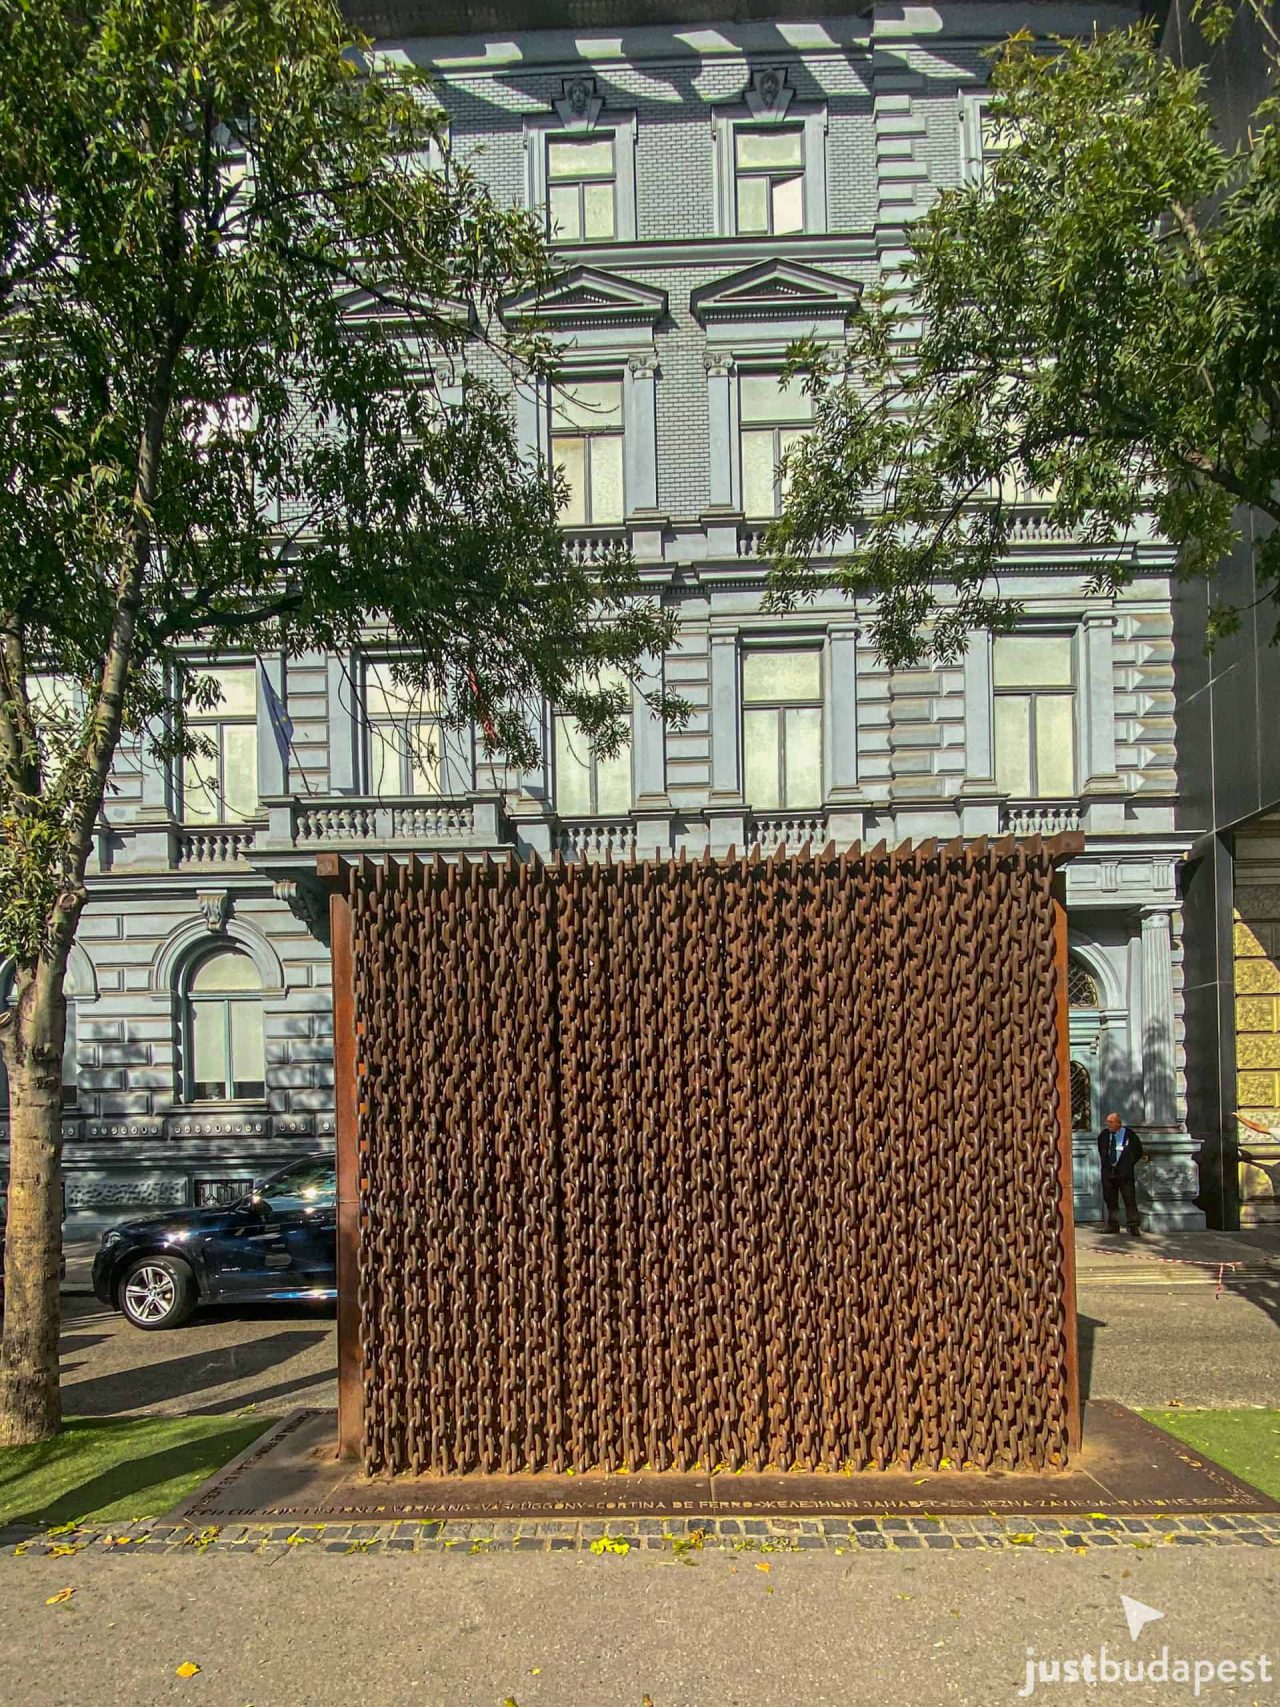 The Iron Curtain Monument